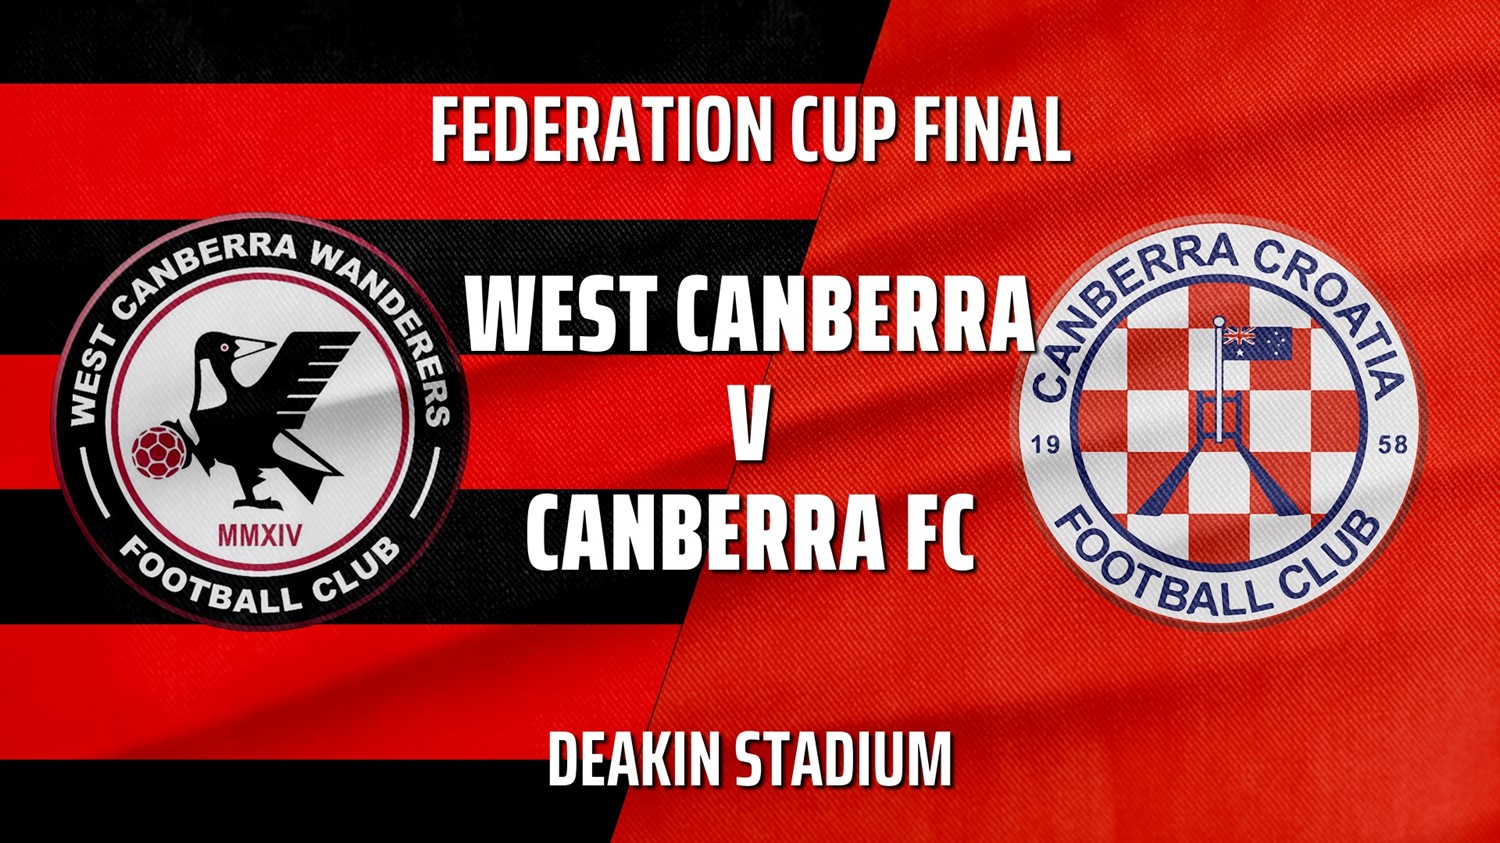 210605-Federation Cup Final - West Canberra Wanderers FC (women) v Canberra FC (women) Minigame Slate Image